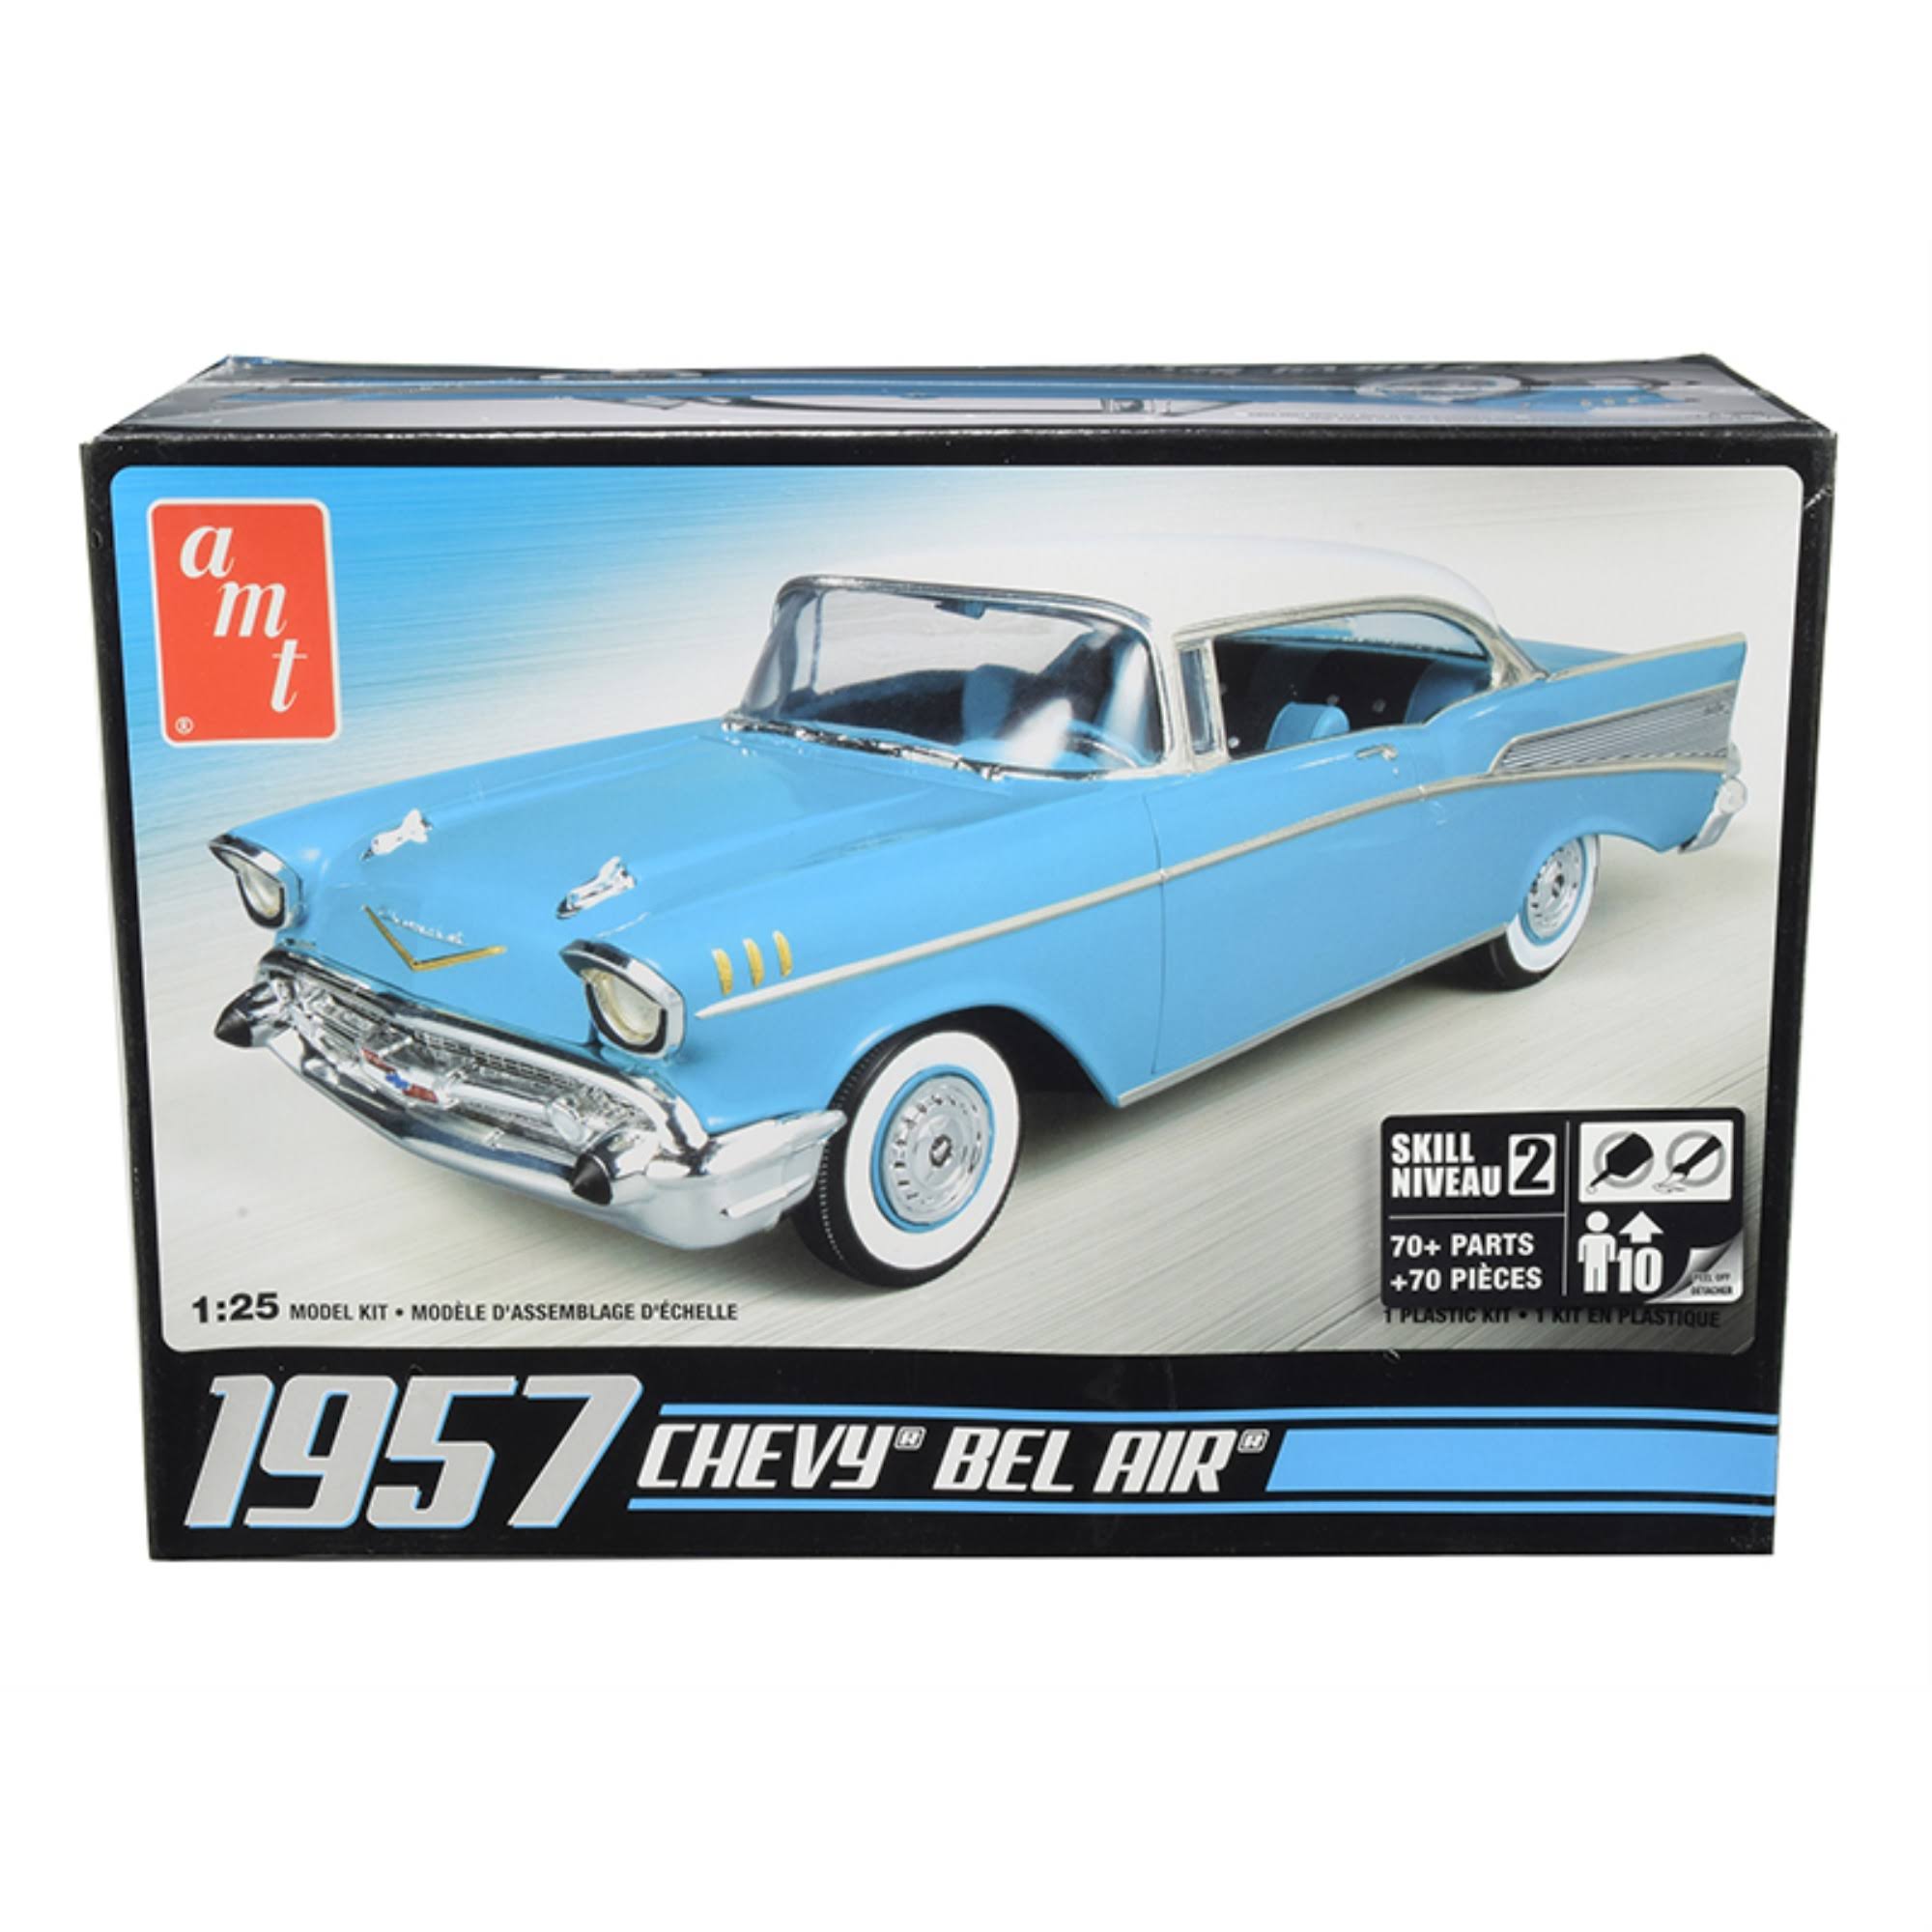 AMT 1957 Chevy Bel Air Plastic Model Kit - 1:25 Scale